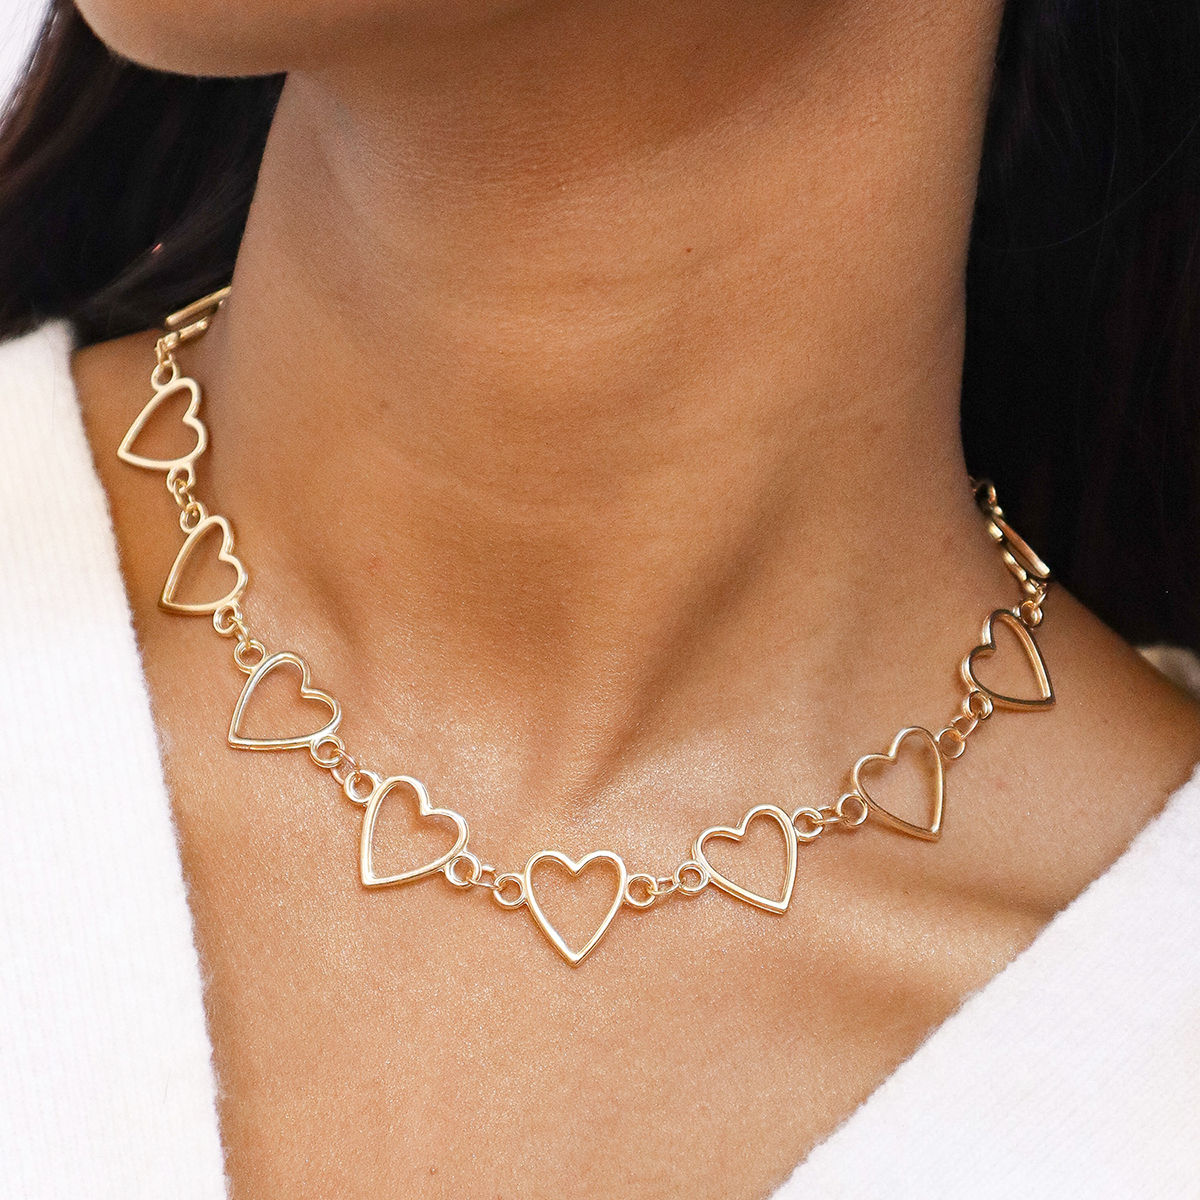 Chic Gold toned Heart Choker Necklace